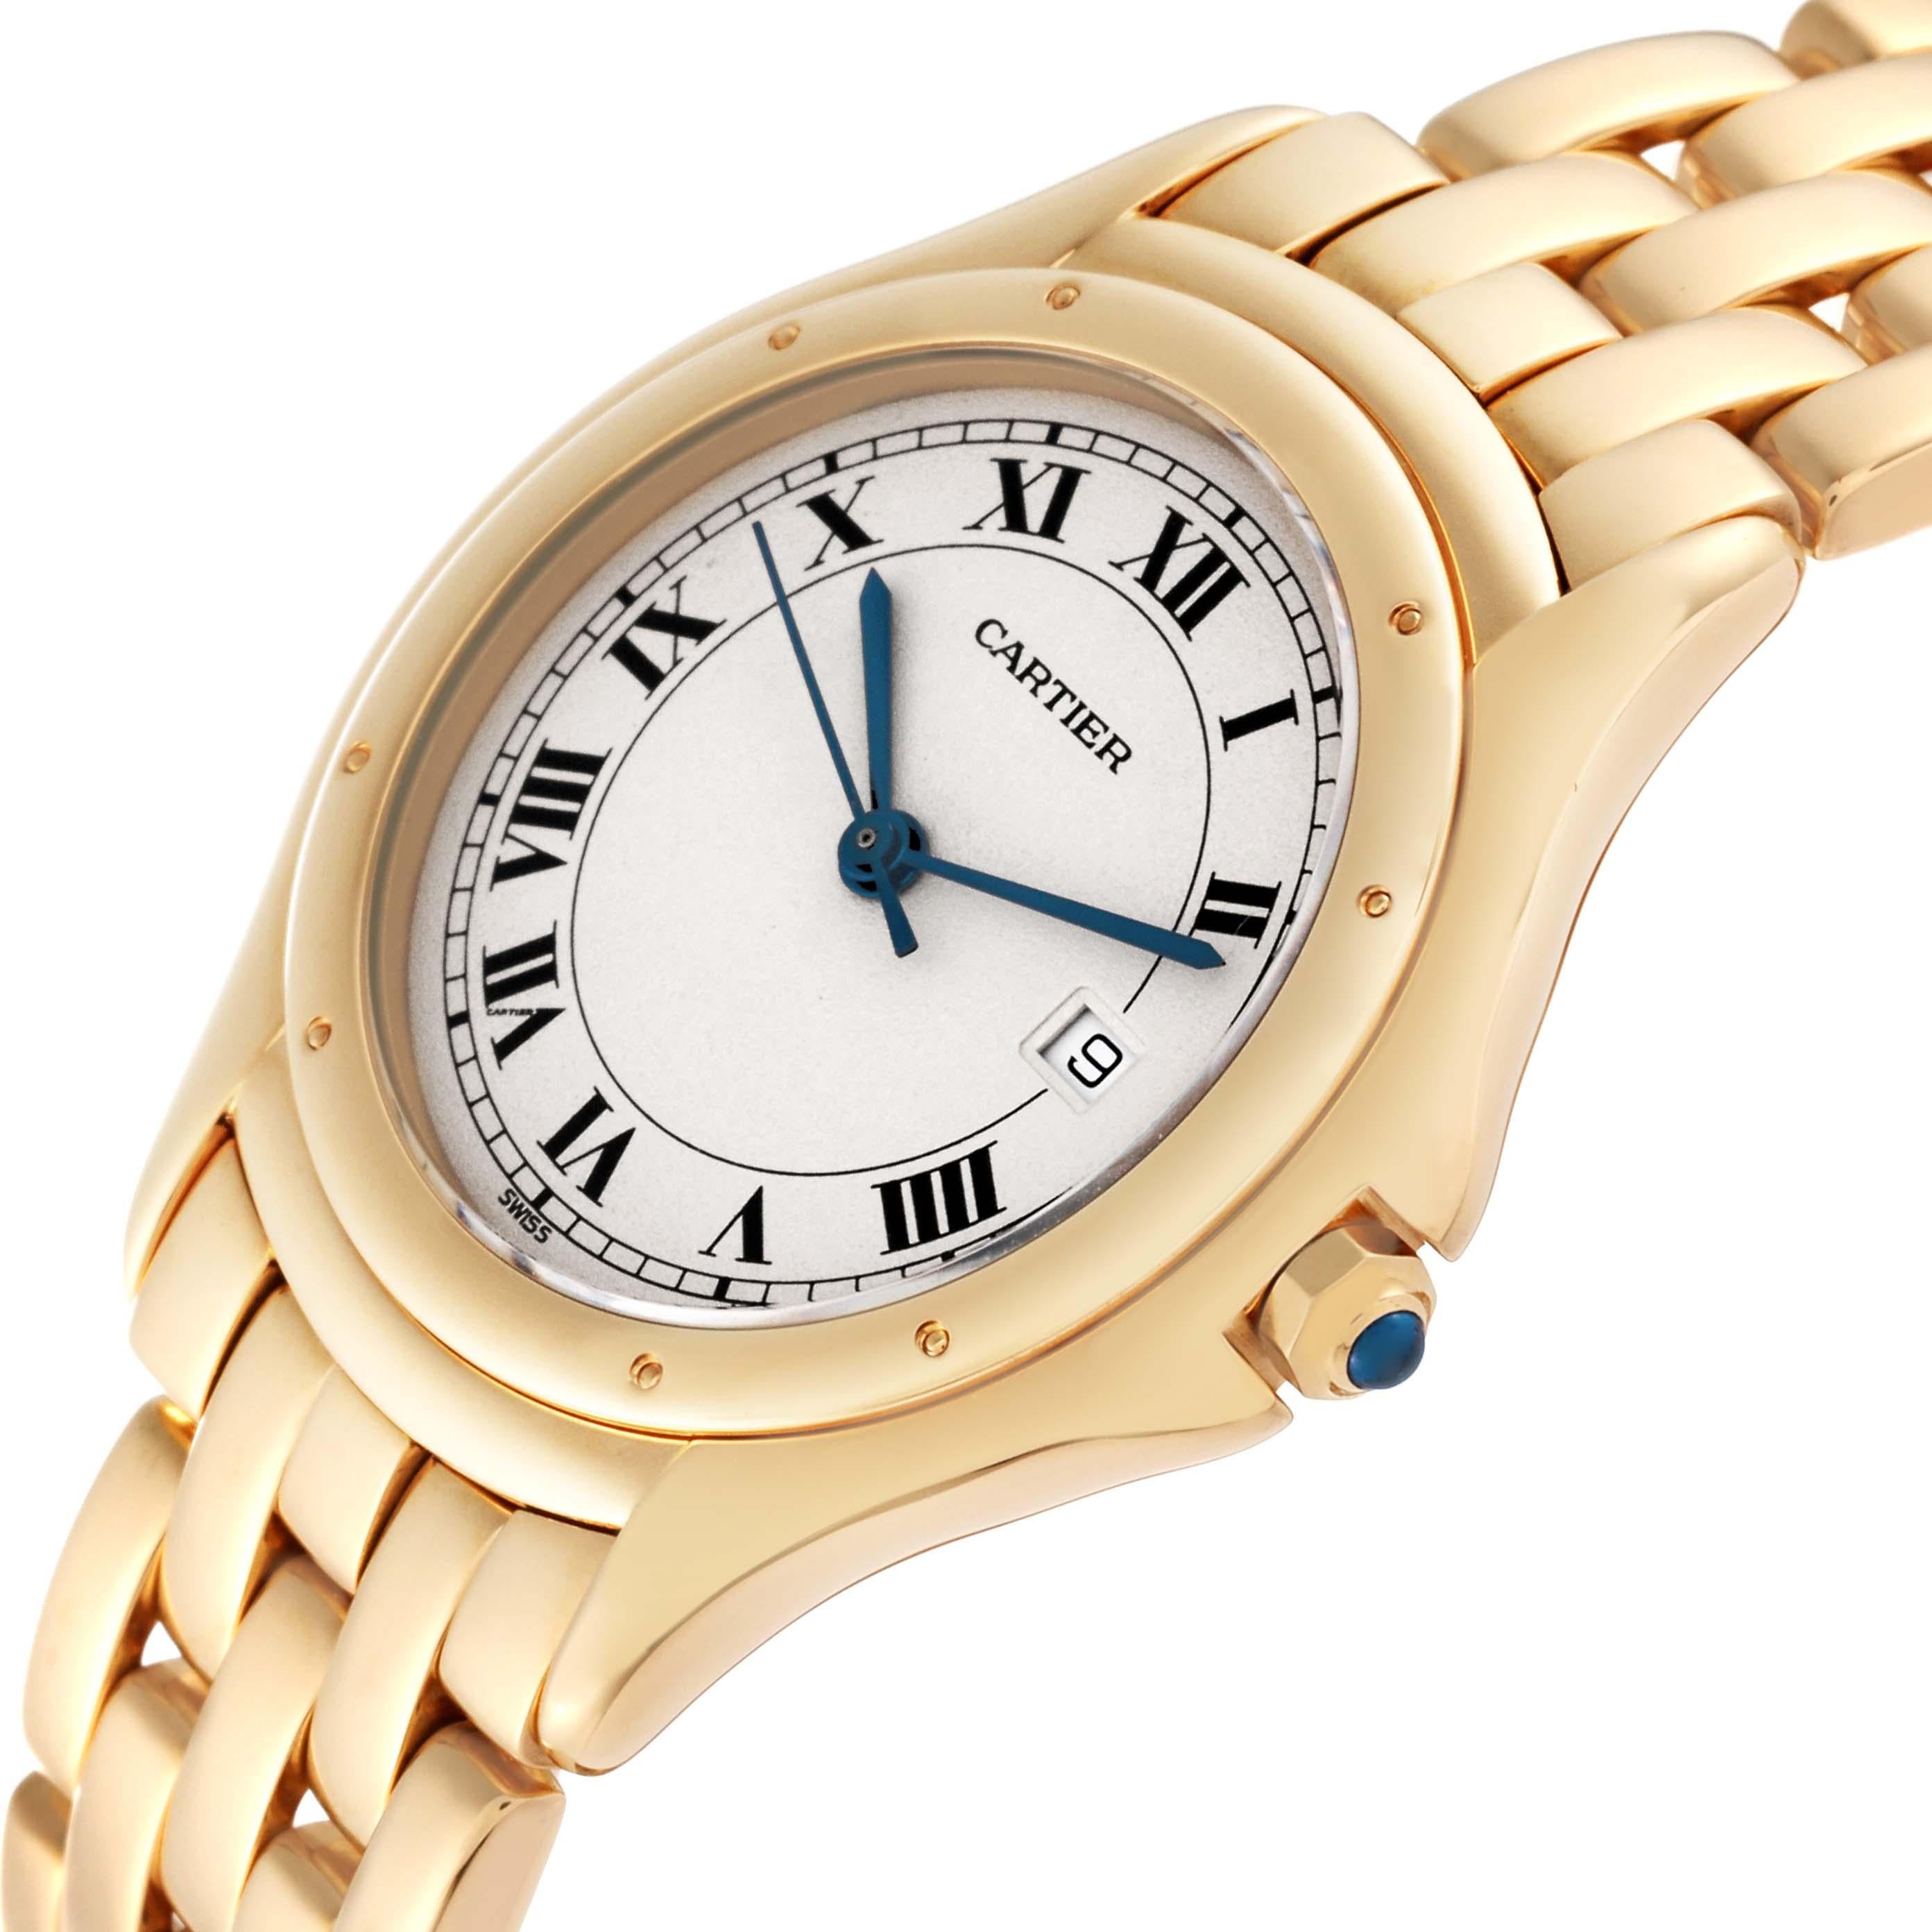 Cartier Cougar Yellow Gold Silver Dial Ladies Watch 887904 For Sale 1